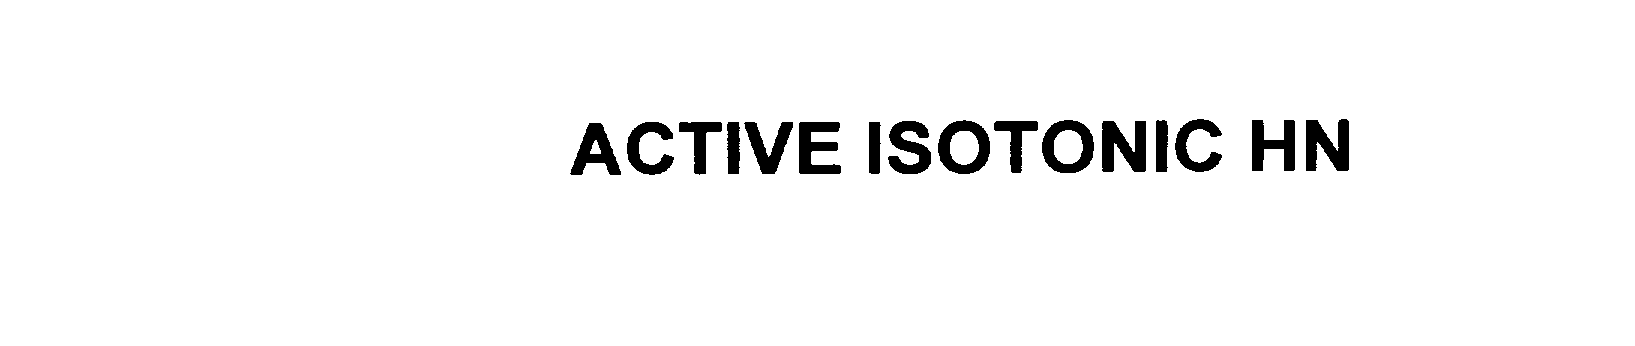  ACTIVE ISOTONIC HN